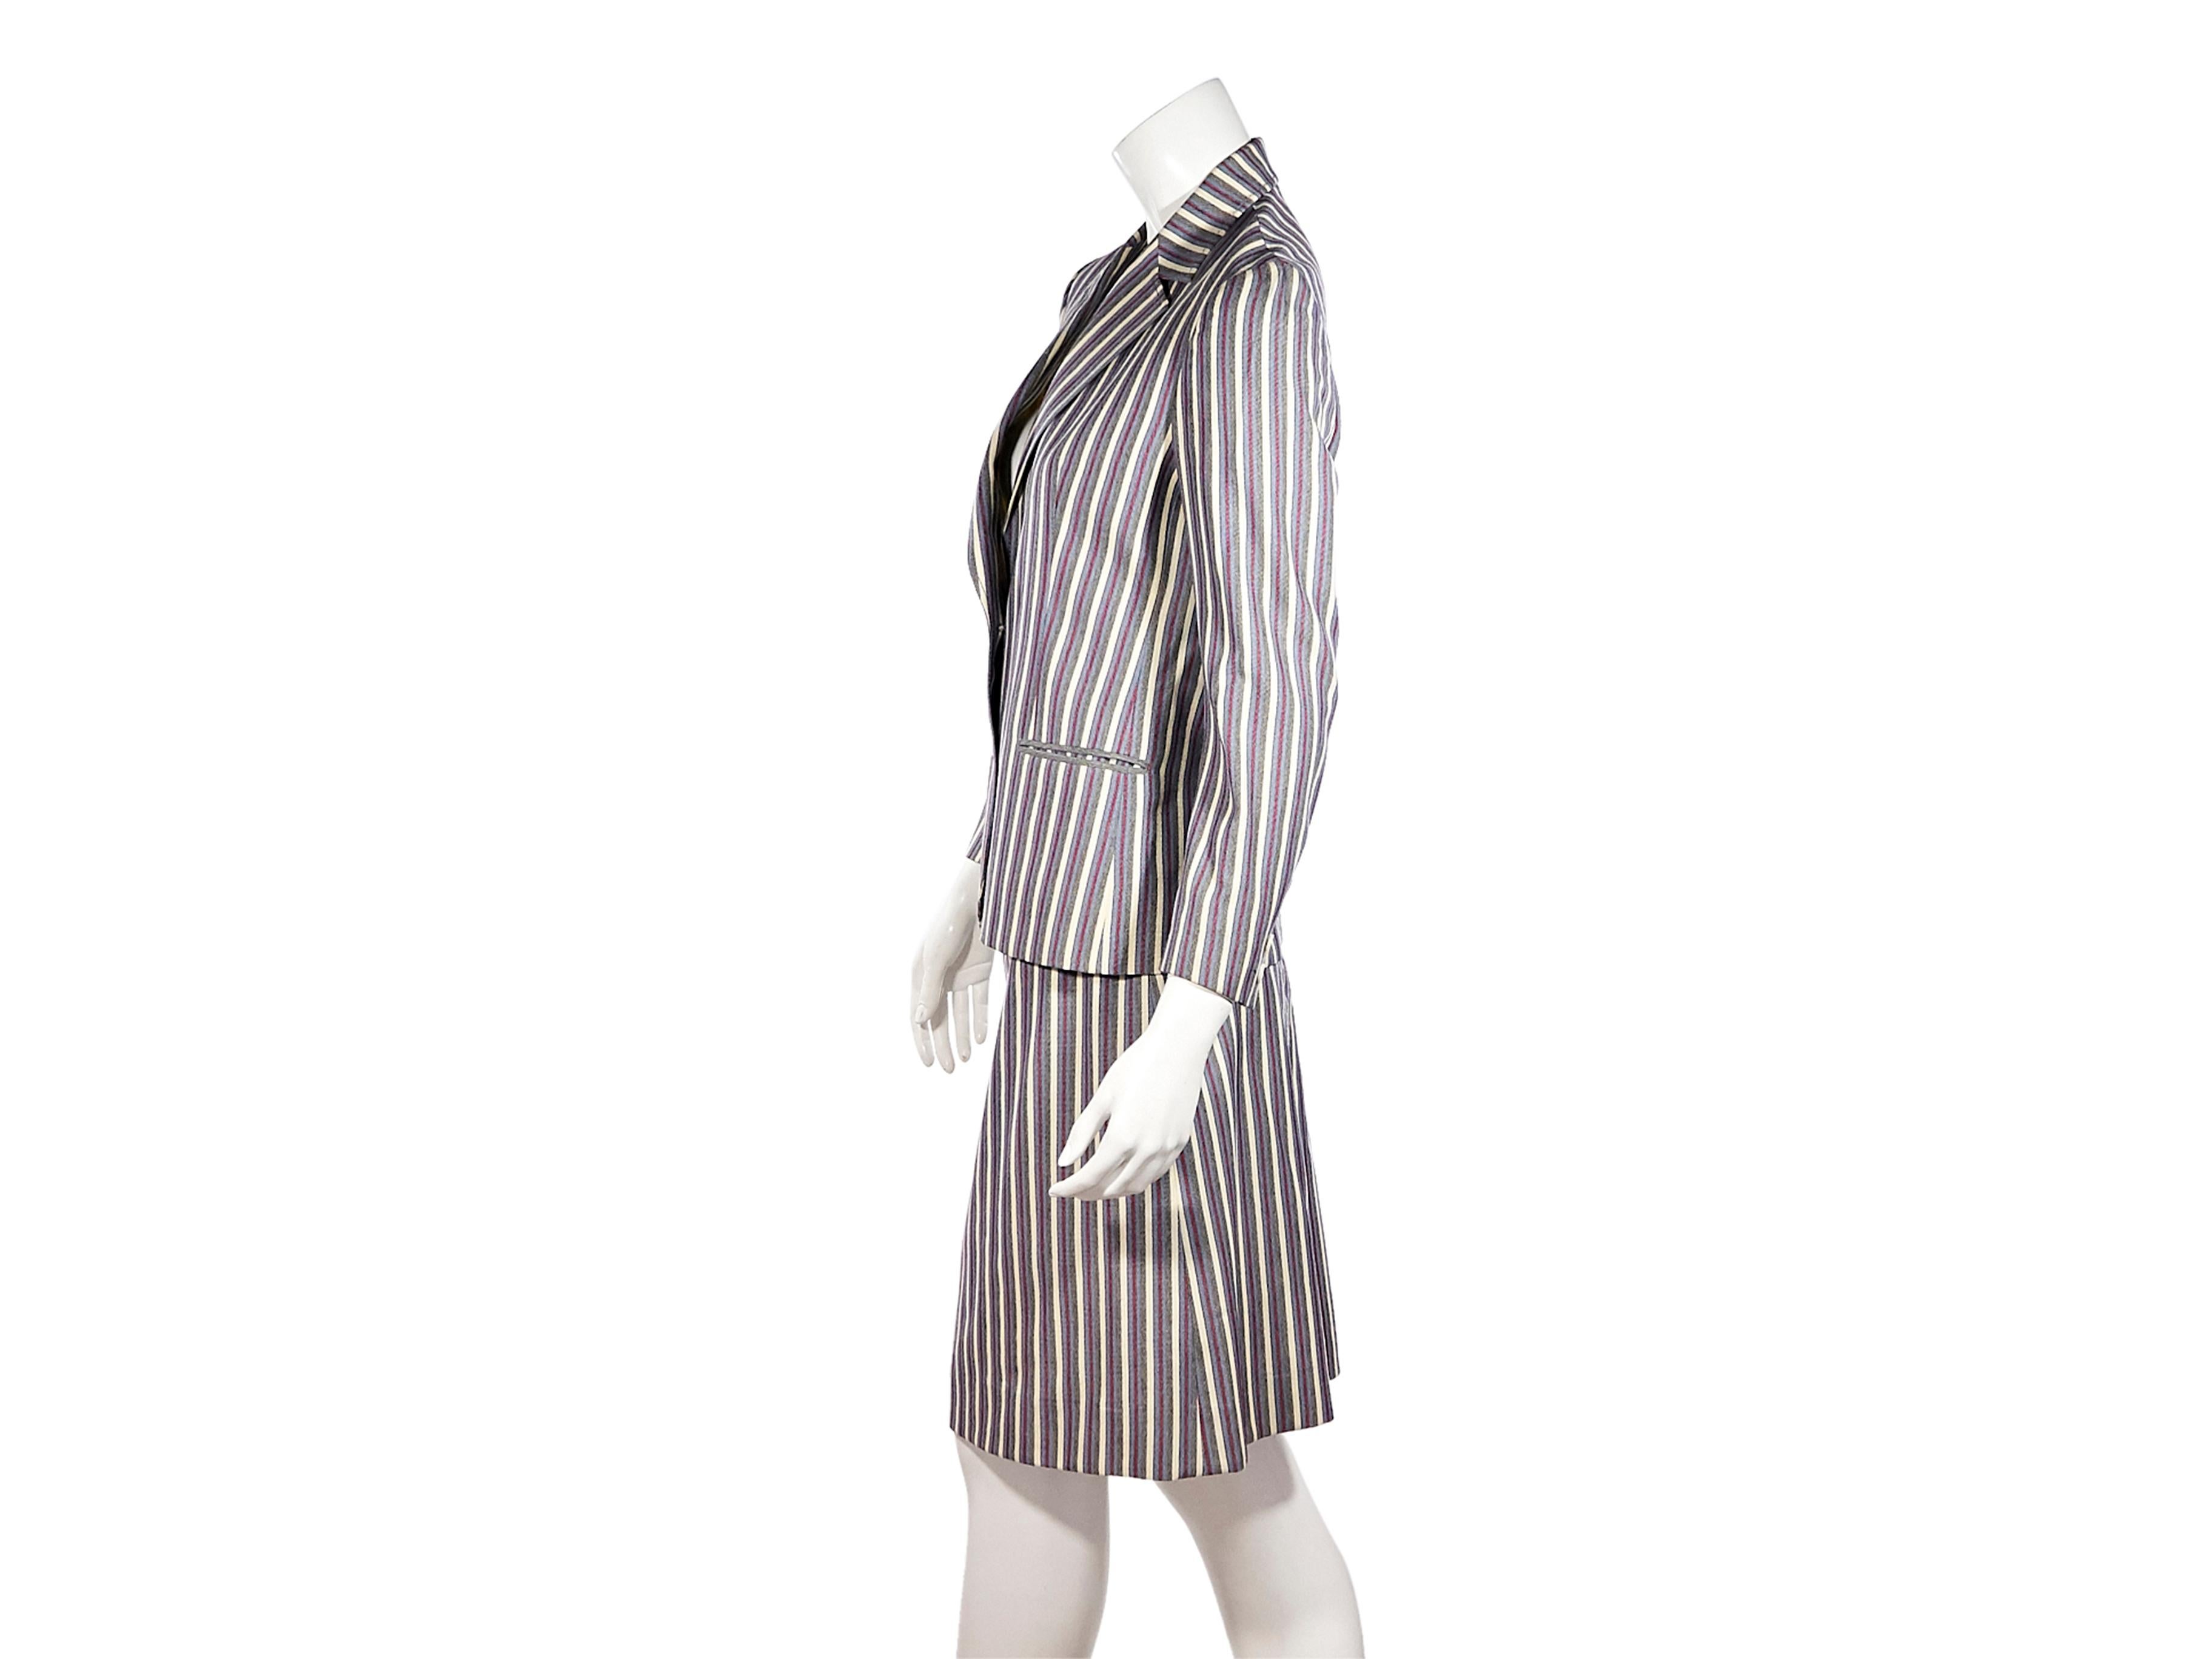 Product details:  Vintage multicolor striped wool skirt suit set by Celine.  Notched lapel.  Long sleeves.  Two-button detail at cuffs.  Button-front closure.  Besom waist pockets.  Matching pencil skirt.  Belted detail at waist.  Goldtone hardware.